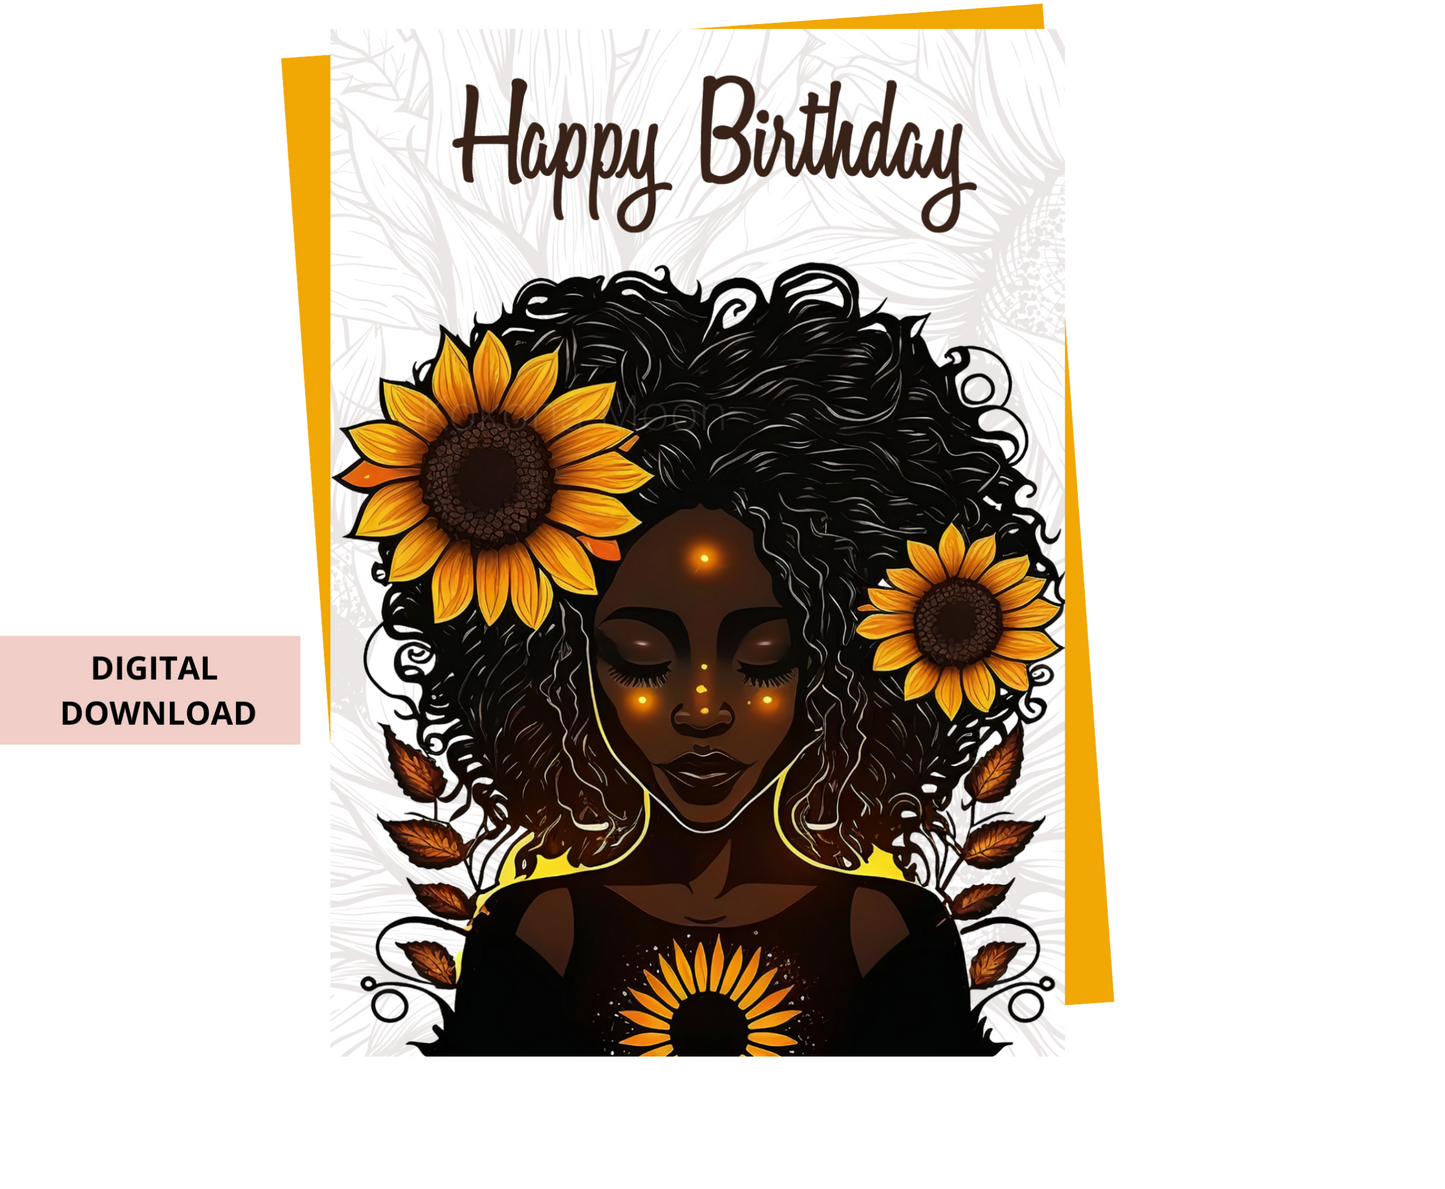 Empowered Beauty: 5x7 Digital Card Birthday Card featuring Beautiful African American Woman with Sunflowers